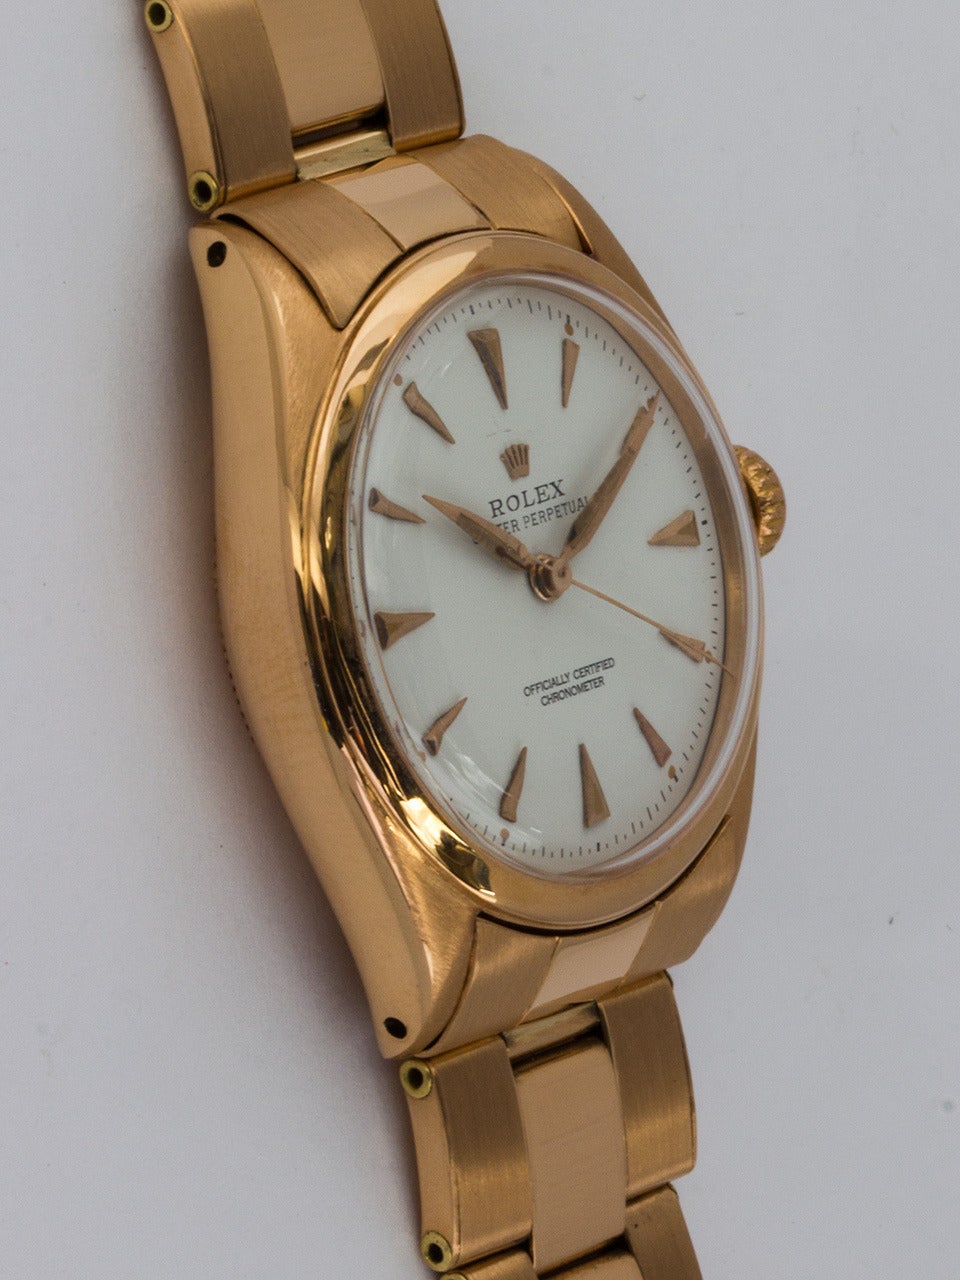 Rolex 18K Rose Gold Oyster Perpetual Wristwatch ref 6084 circa 1956. 34mm diameter Oyster case with smooth bezel and acrylic crystal. Lovely refinished white dial with applied triangular indexes and tapered sword hands. Powered by self winding